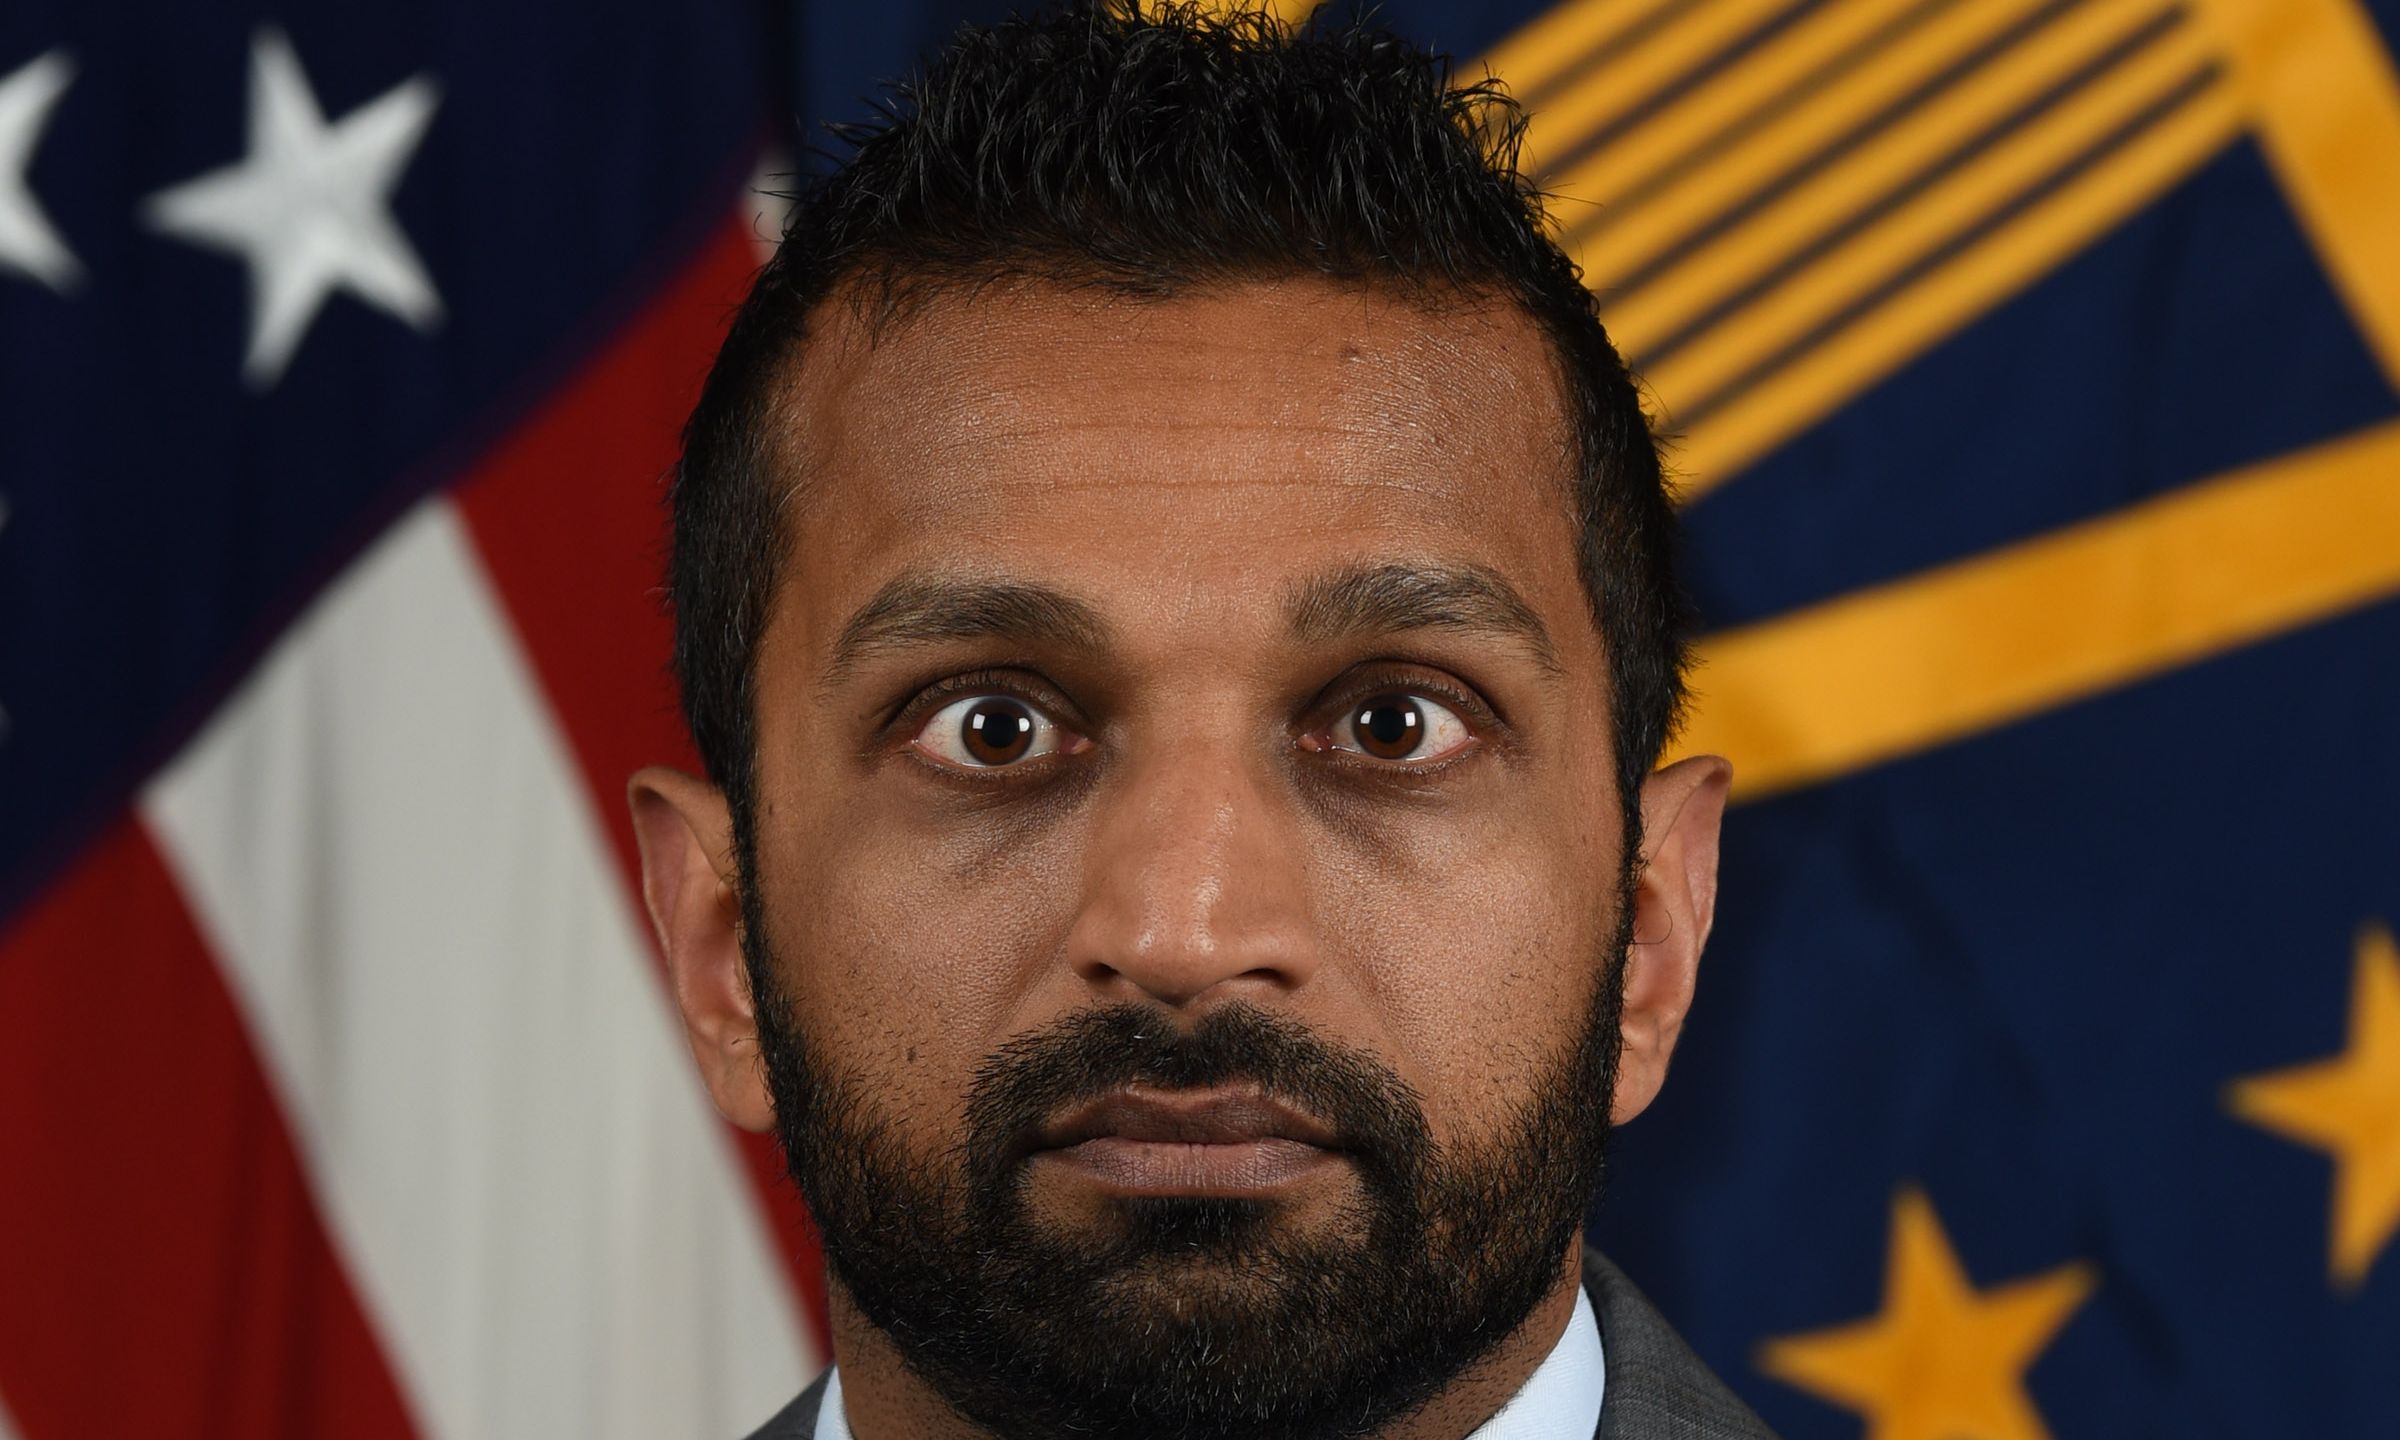 Former Trump administration official Kash Patel poses for a photograph.